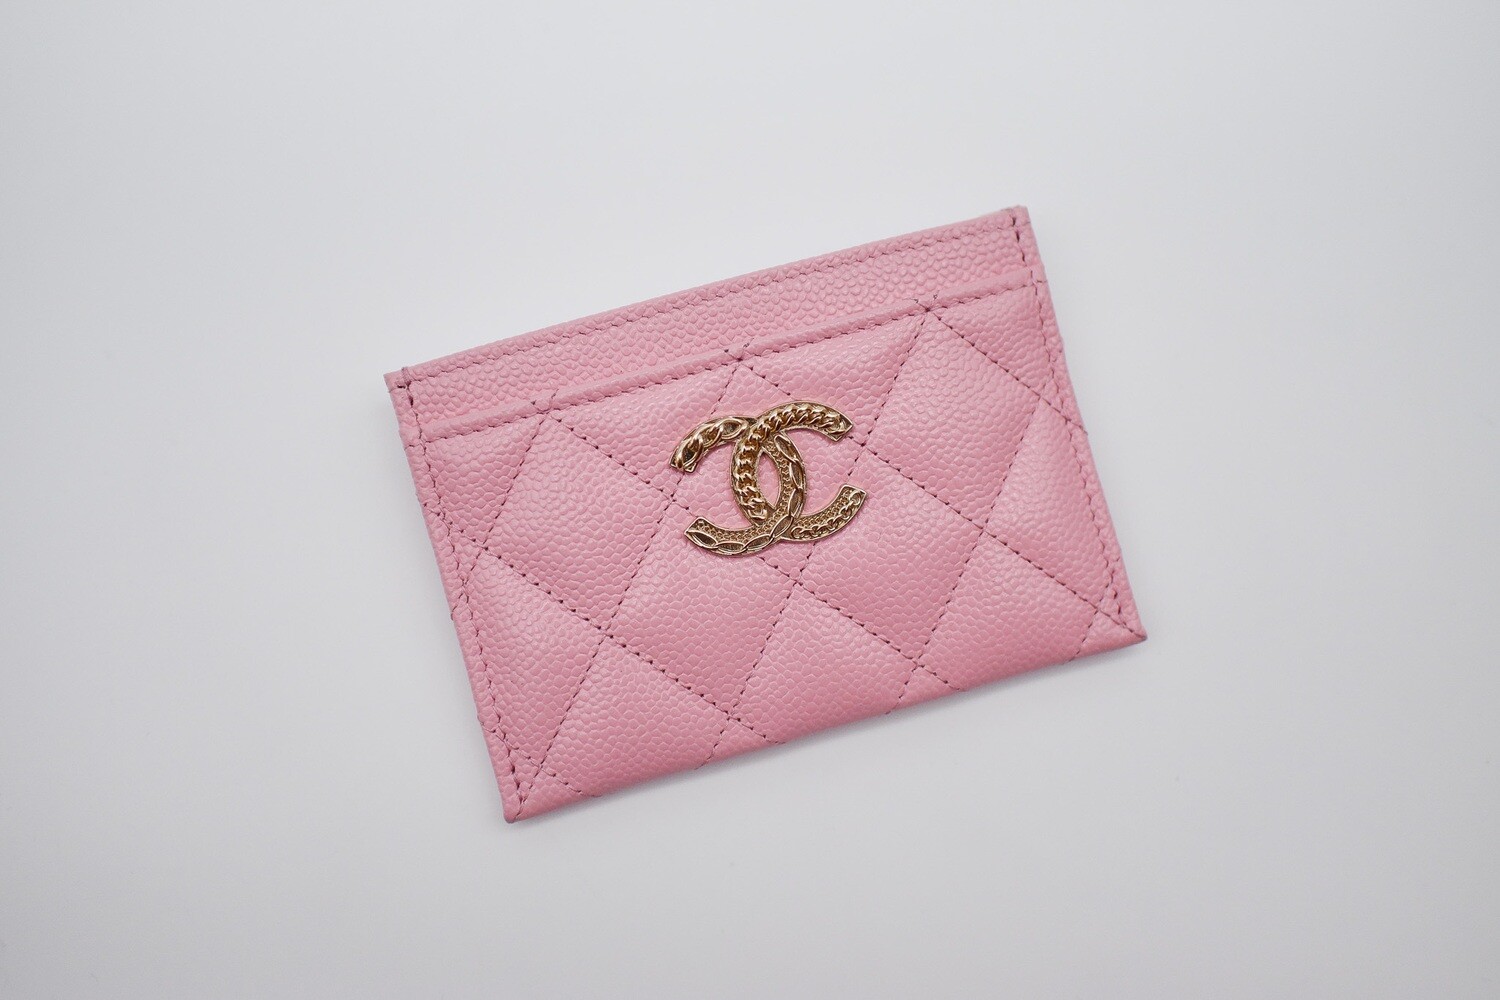 Chanel SLG Flat Cardholder with Large CC, 22K Pink Caviar Leather with Gold  Hardware, New in Box MA001